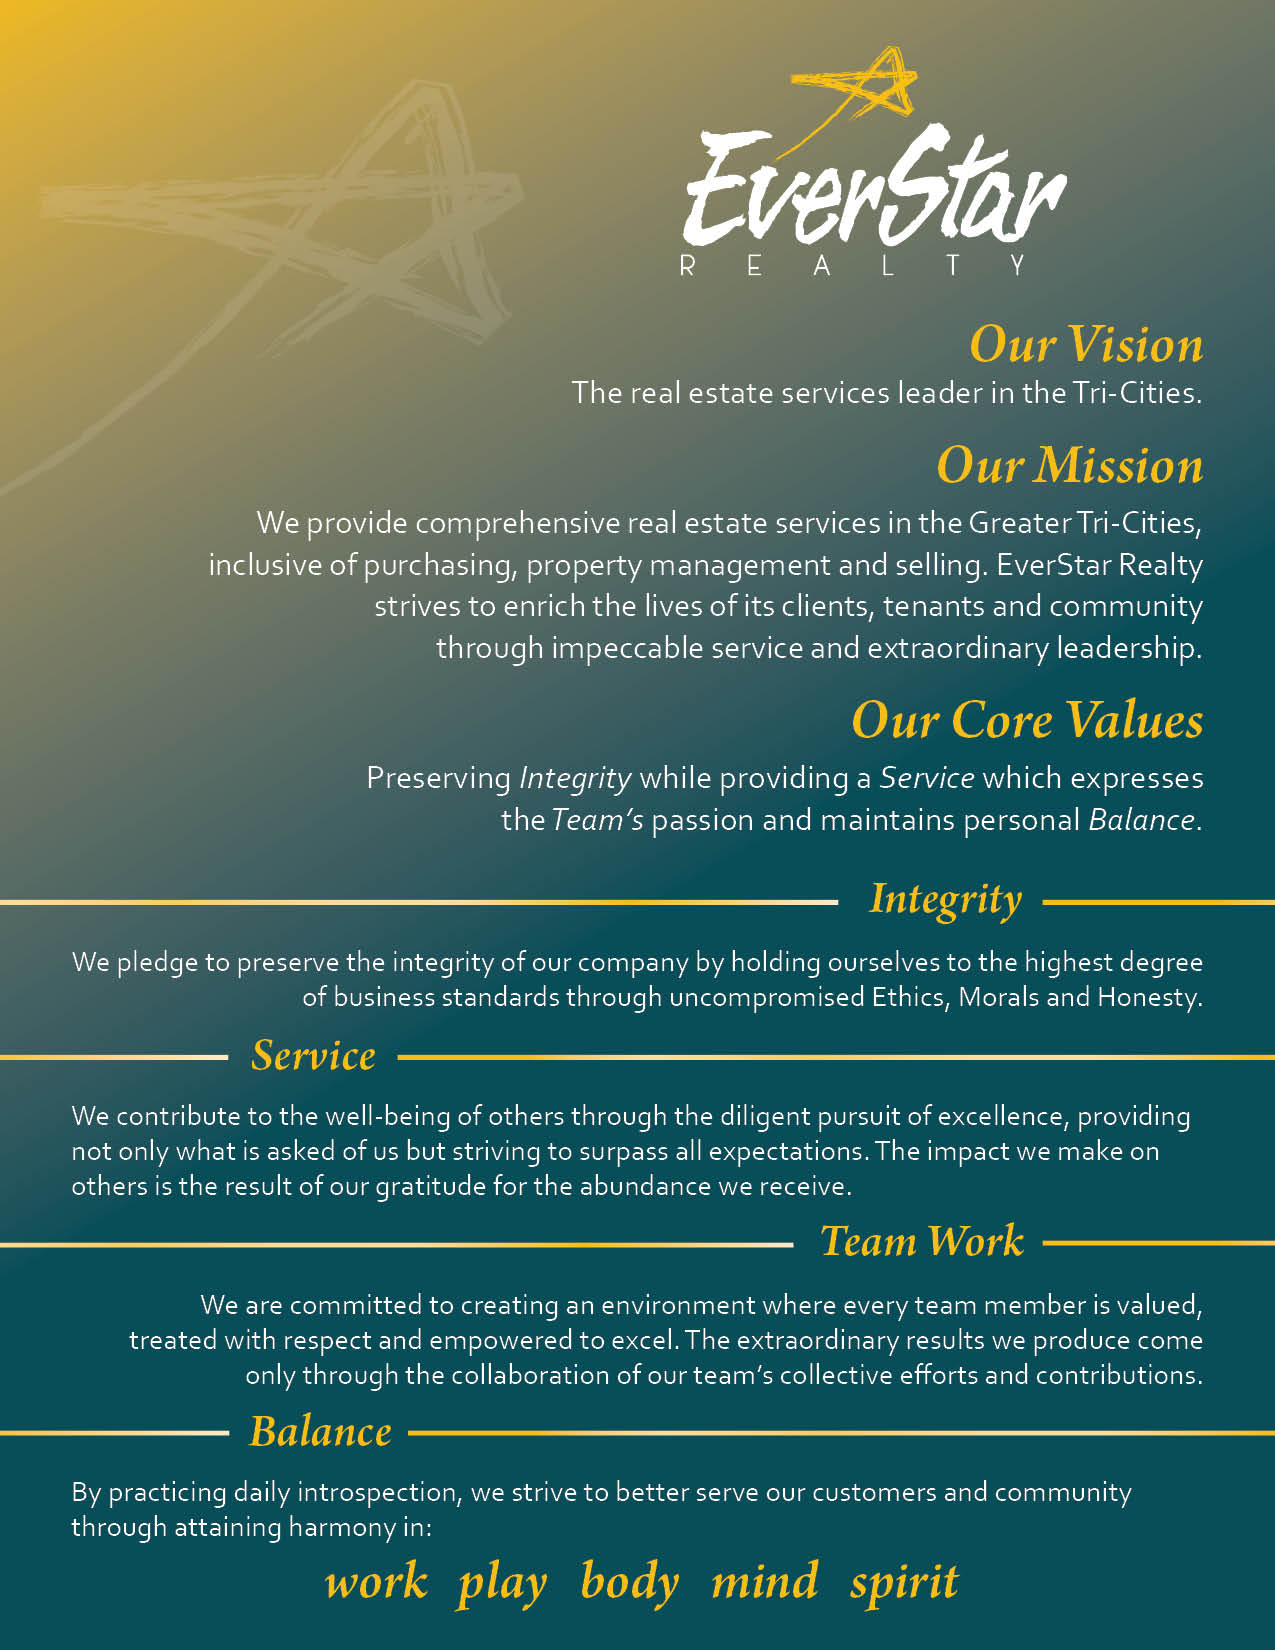 EverStar Mission Statement graphic. Describes our Vision, Mission and Core Values, which can be found in full on our About Us page.